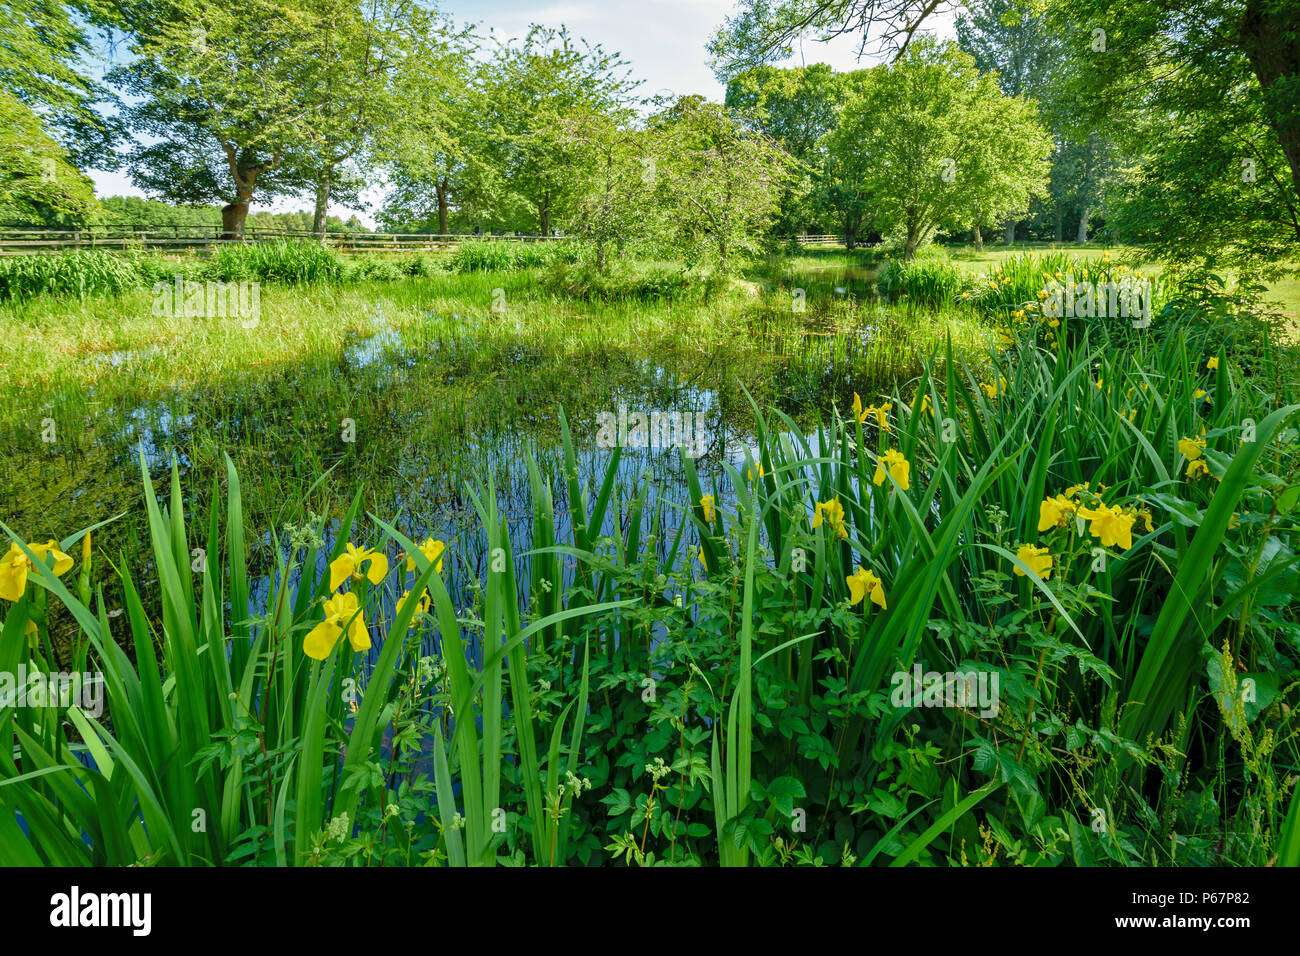 CAWDOR CASTLE NAIRN SCOTLAND SMALL LAKE NEAR THE CASTLE WITH YELLOW FLOWERS OF THE IRIS Stock Photo